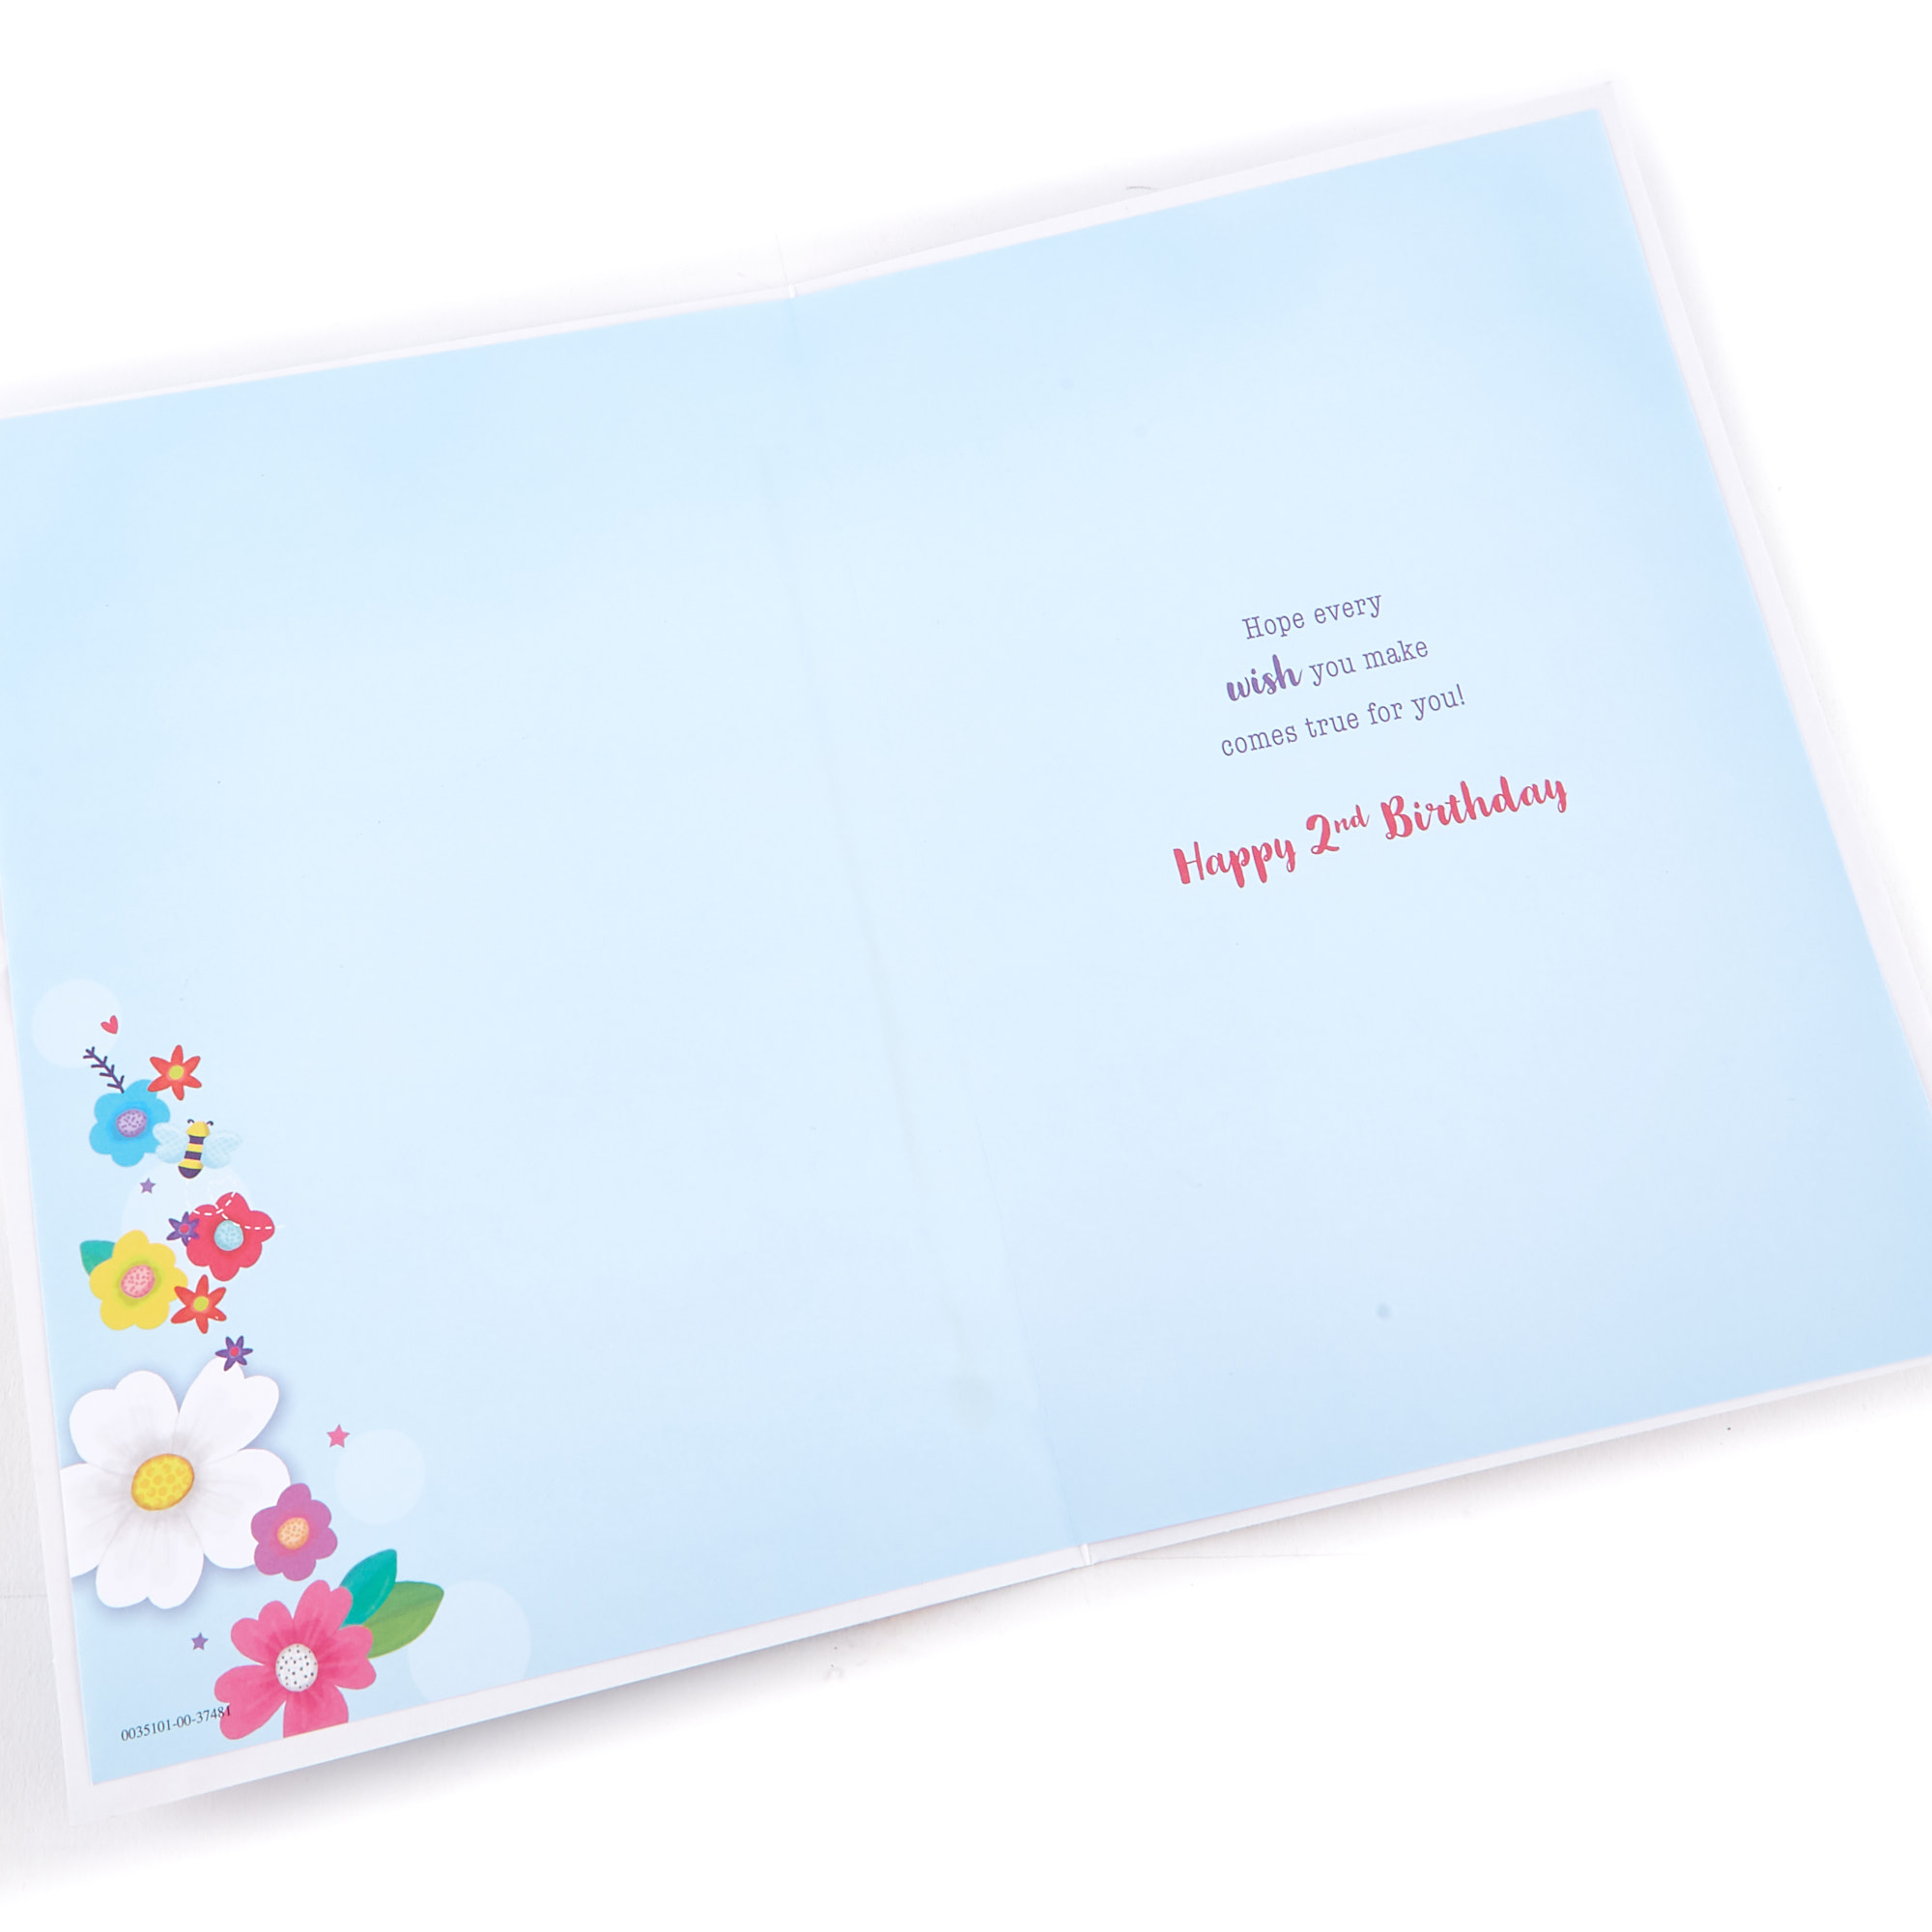 2nd Birthday Card - Butterfly 